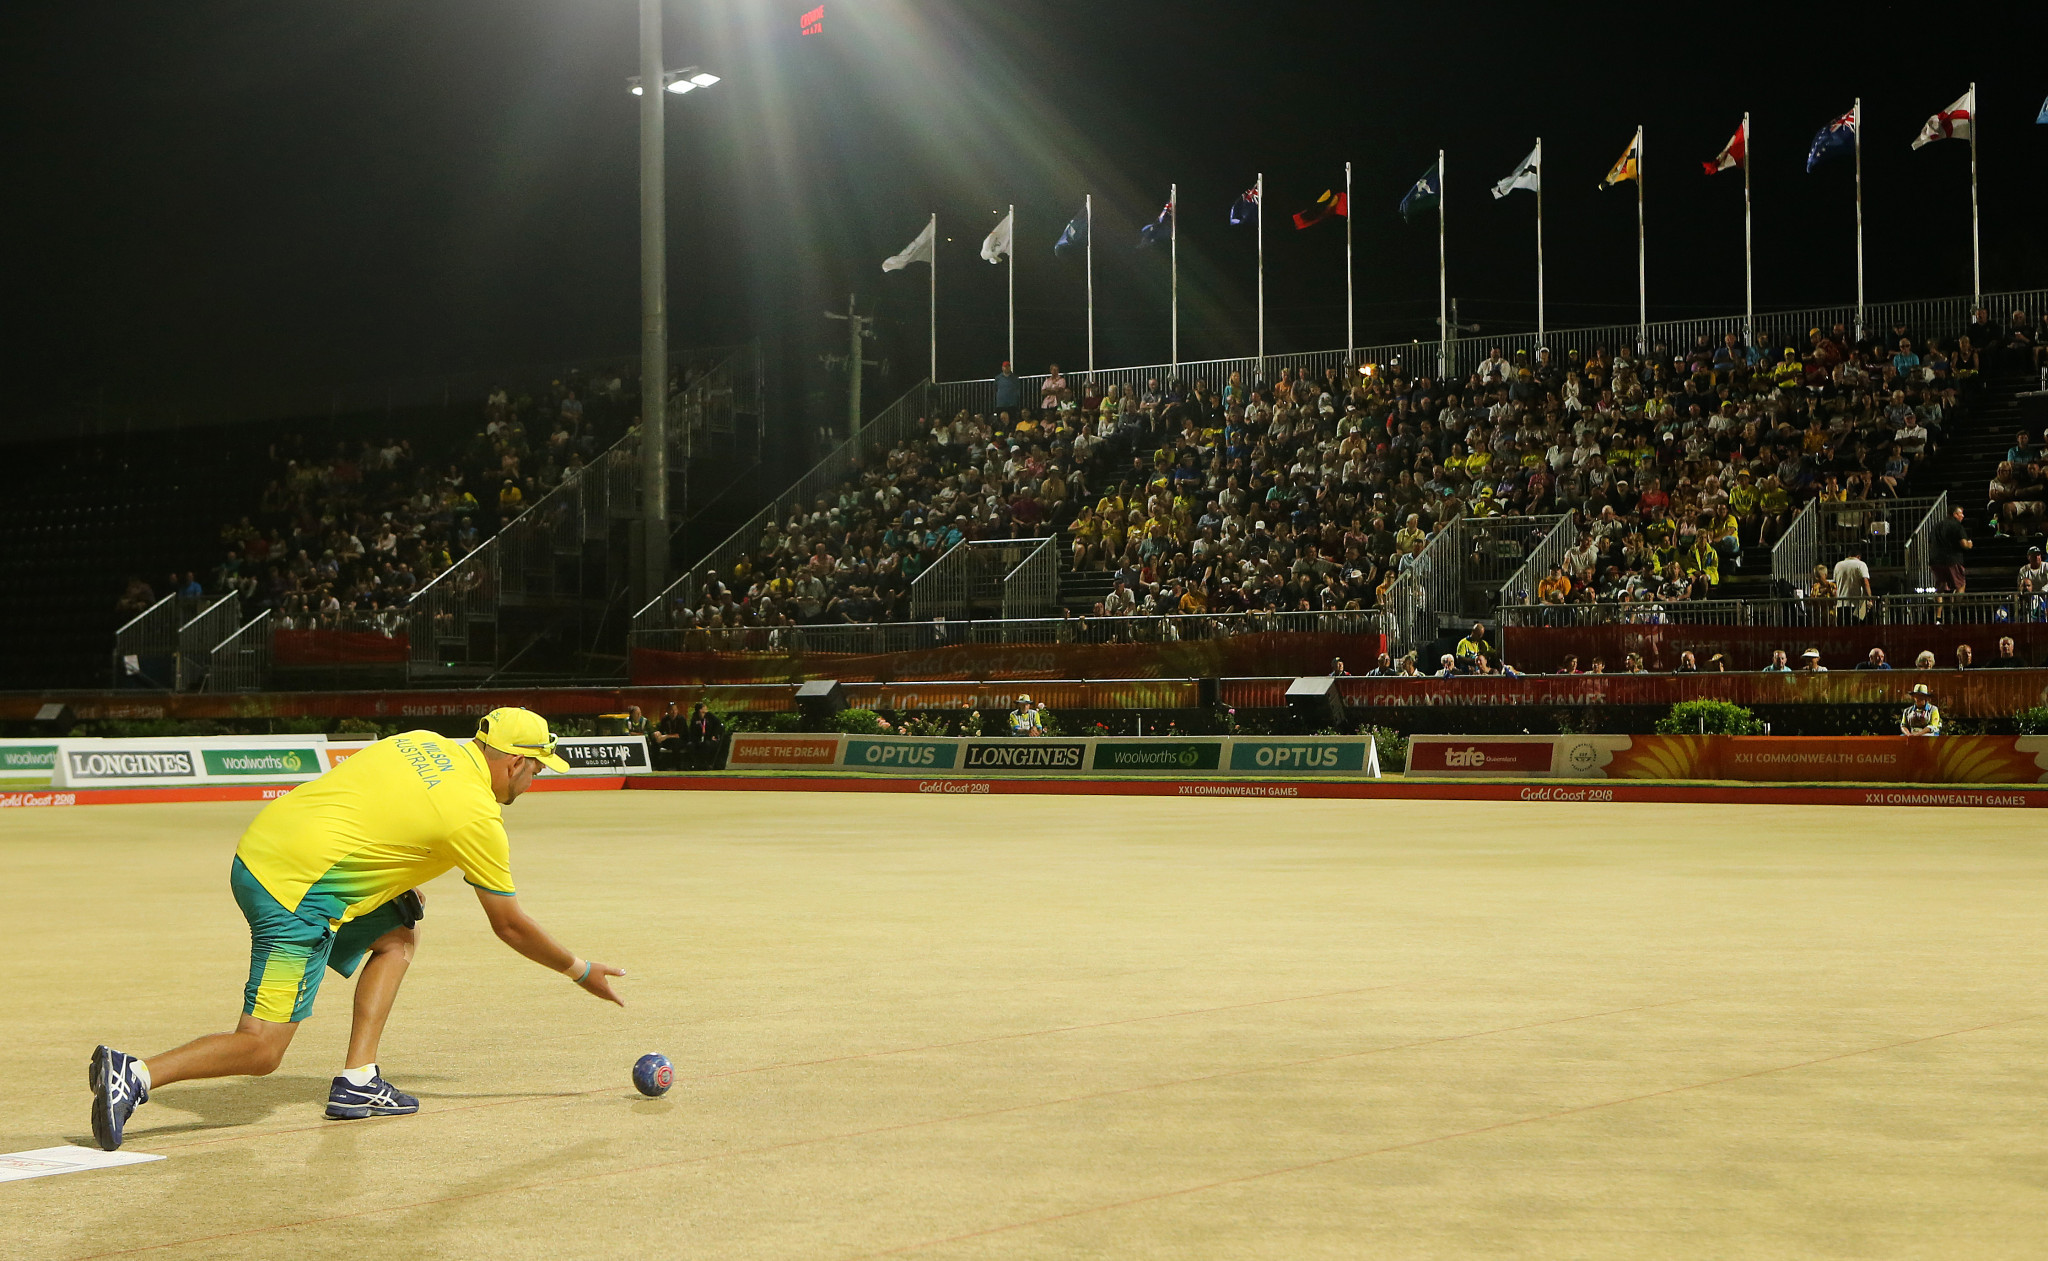 Australia will face a rest of the world team in the World Bowls Challenge event ©Getty Images